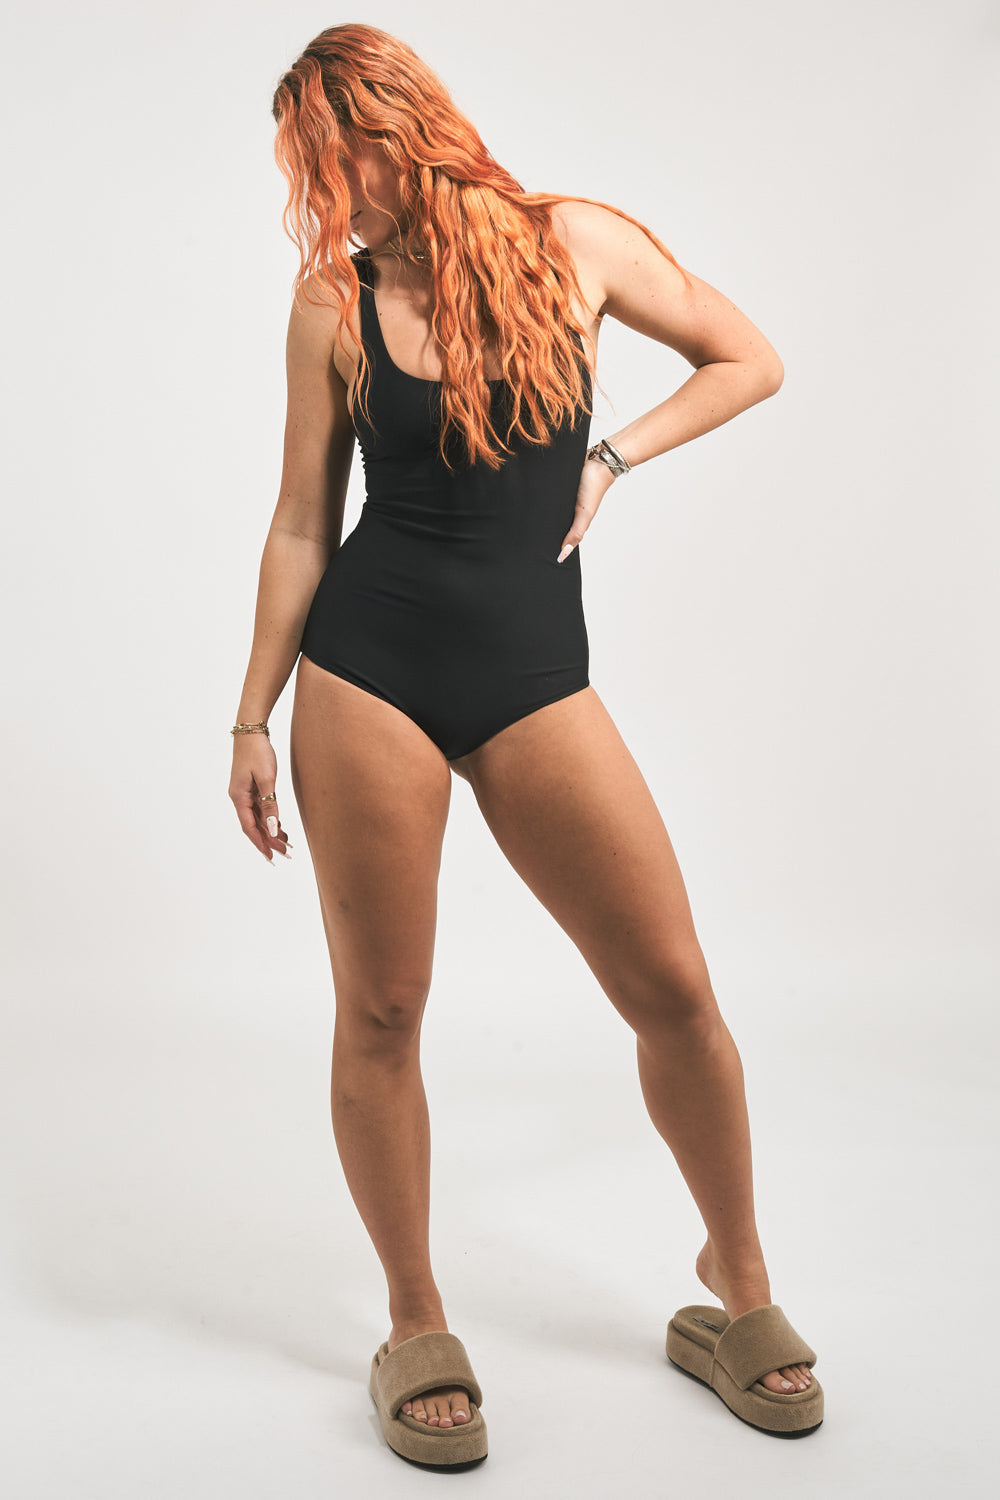 Black Performance - Cross Over One Piece w/ Extra Coverage Bottoms - Exoticathletica